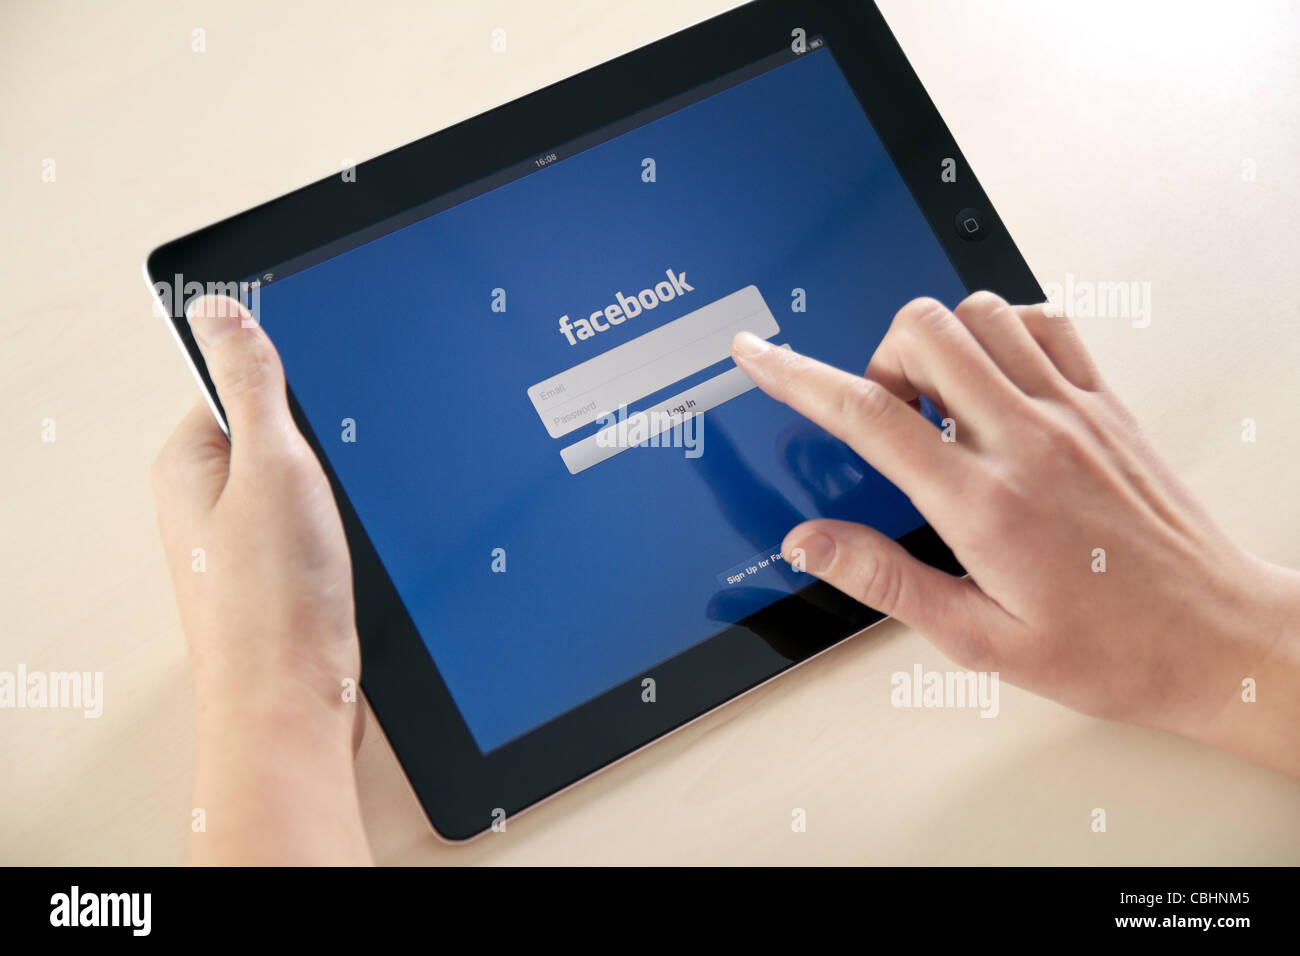 Facebook launch application for iPad in October 10, 2011. Girl trying to log in using Apple iPad2. Stock Photo